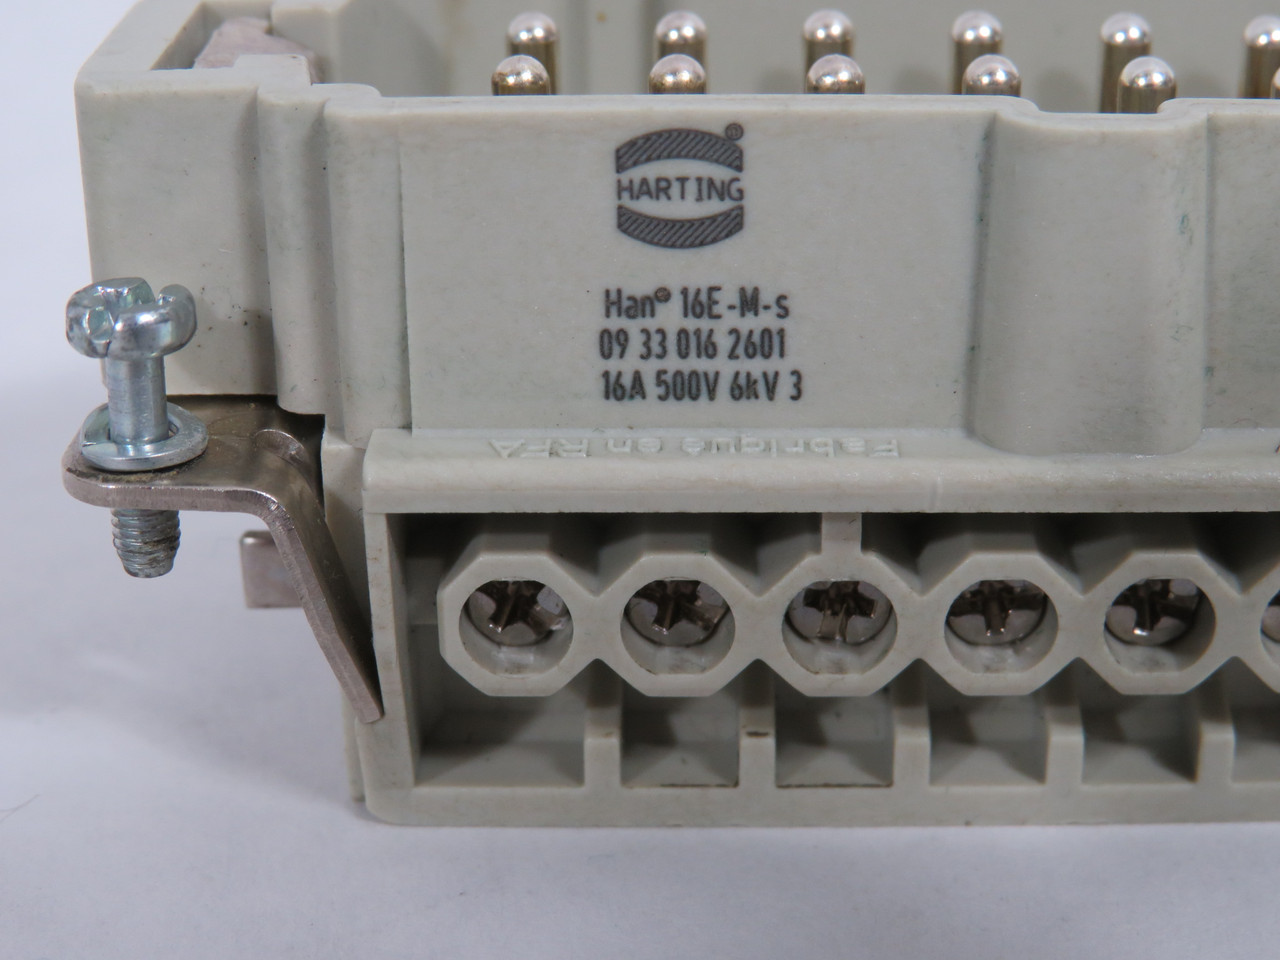 Harting 09330162601 HAN-16E-M-S 16 Pos Male Connector 16A@500V USED